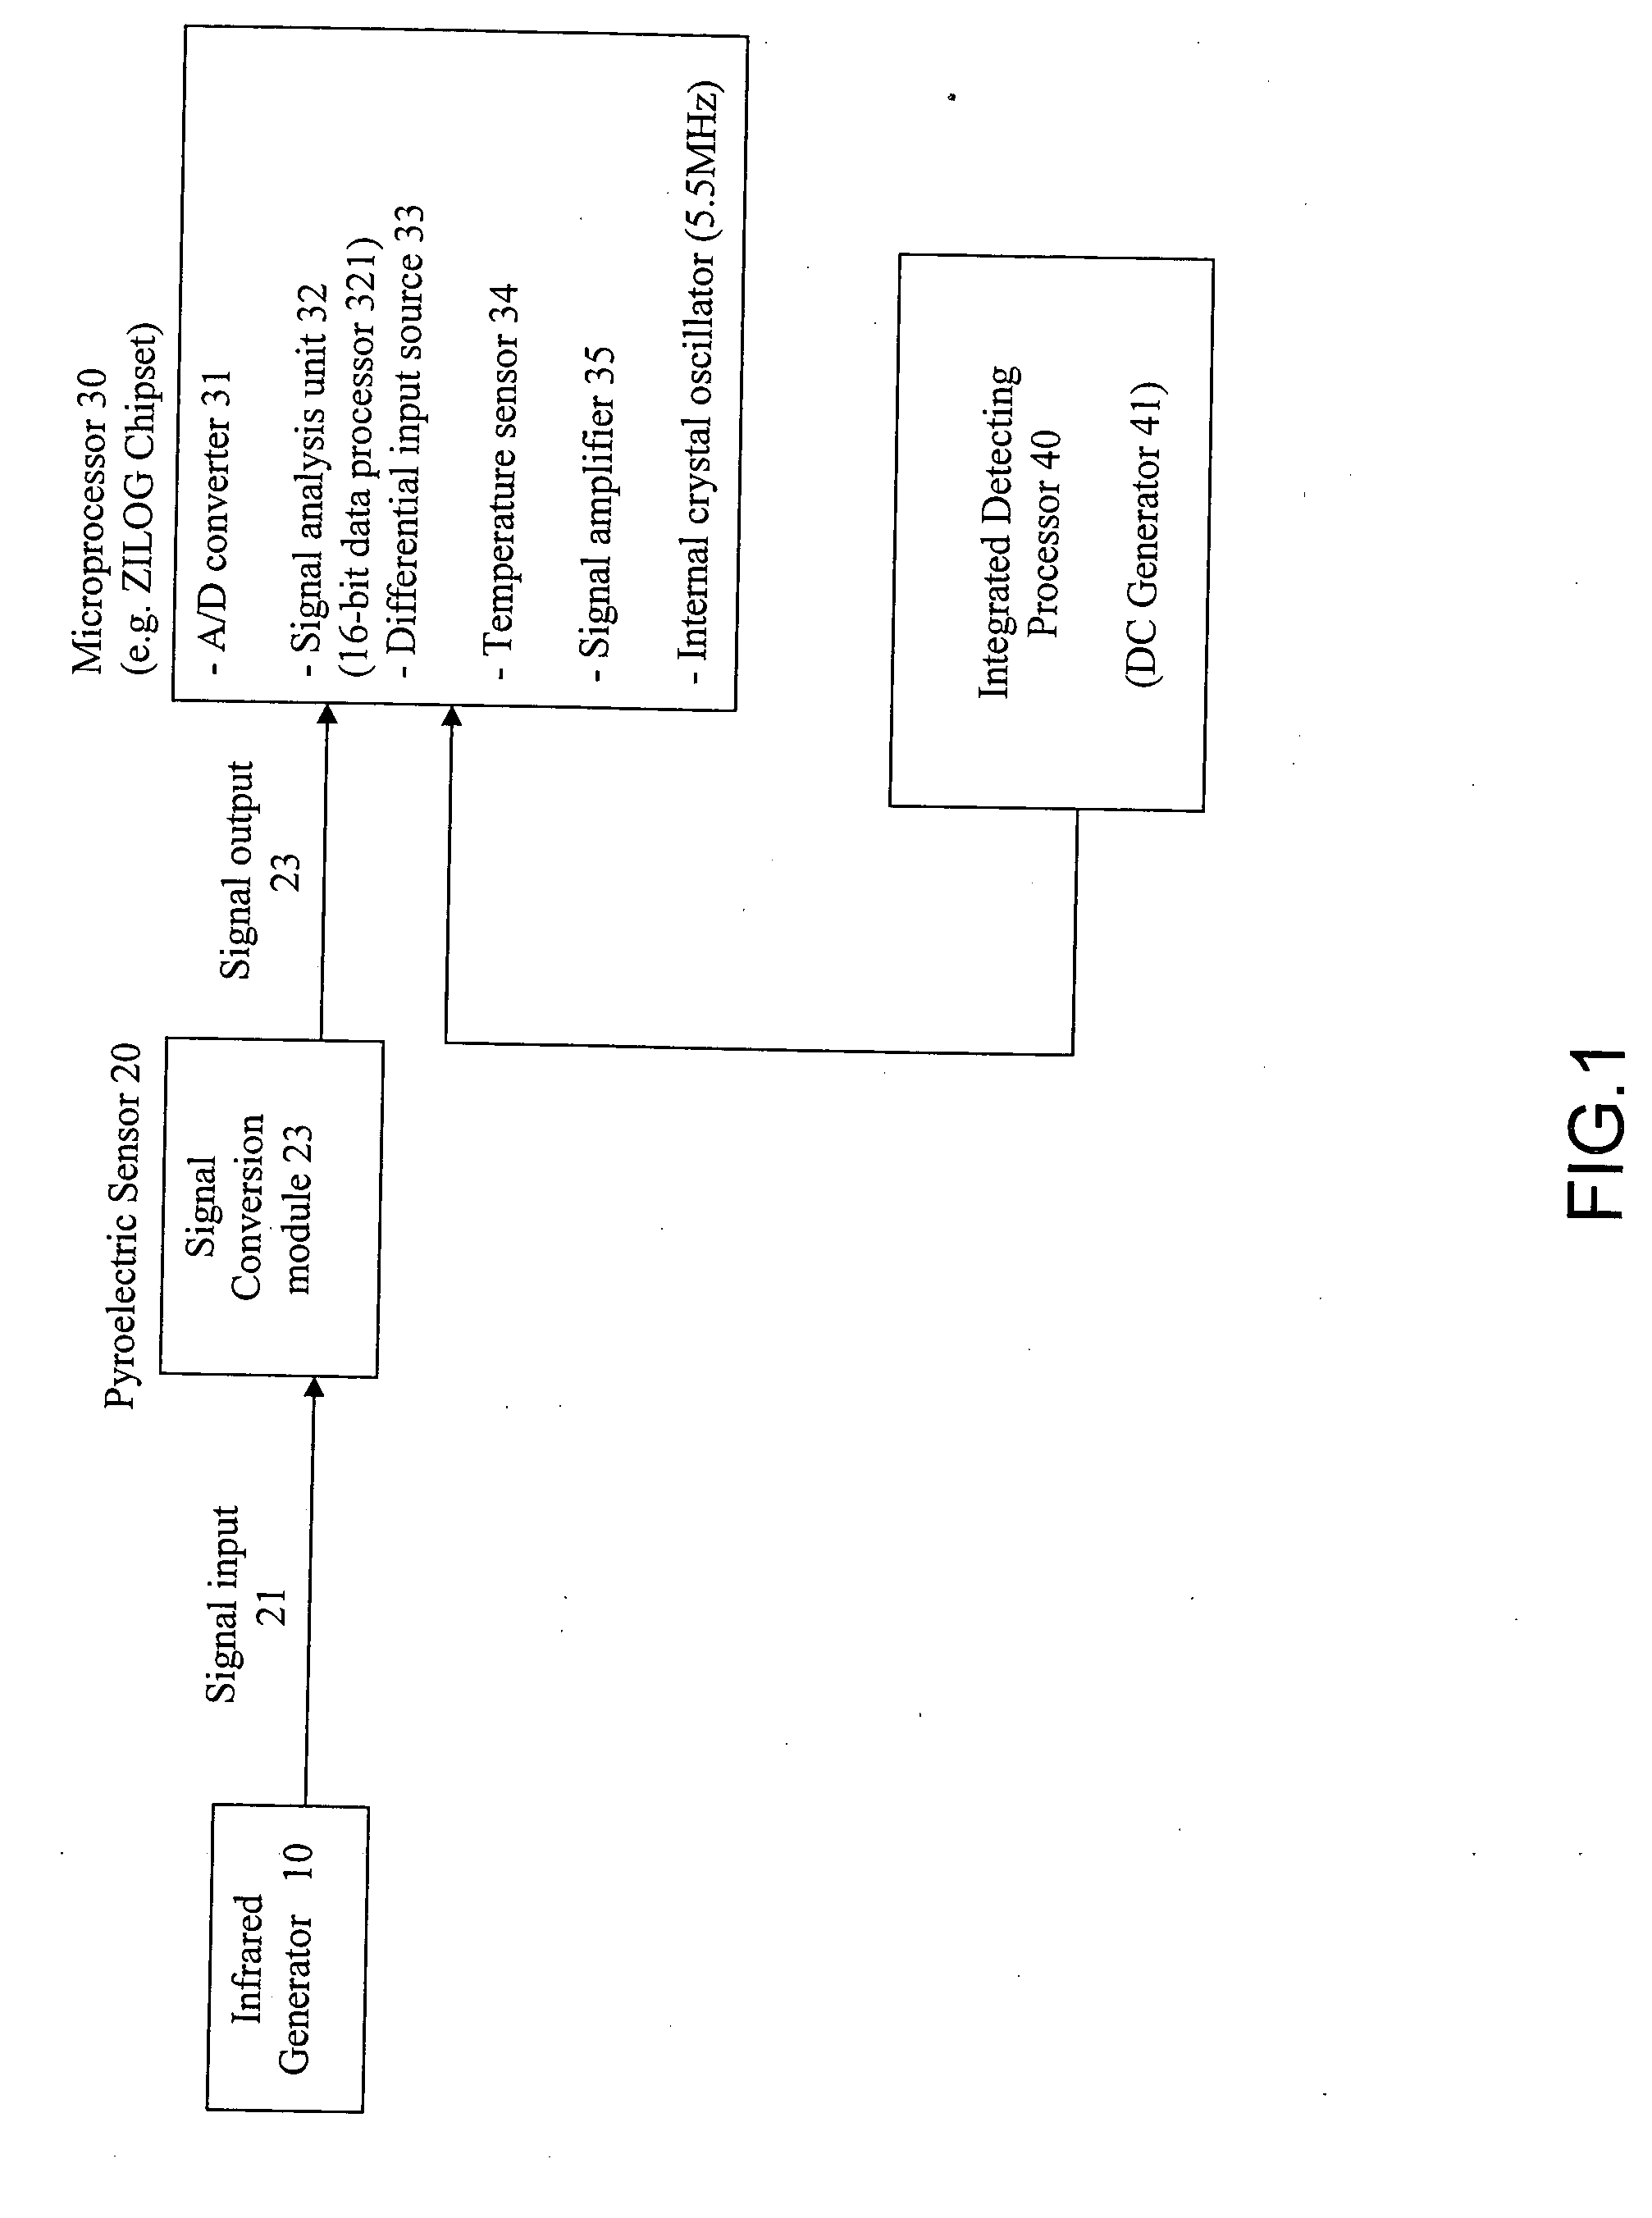 Energy signal detection device containing integrated detecting processor